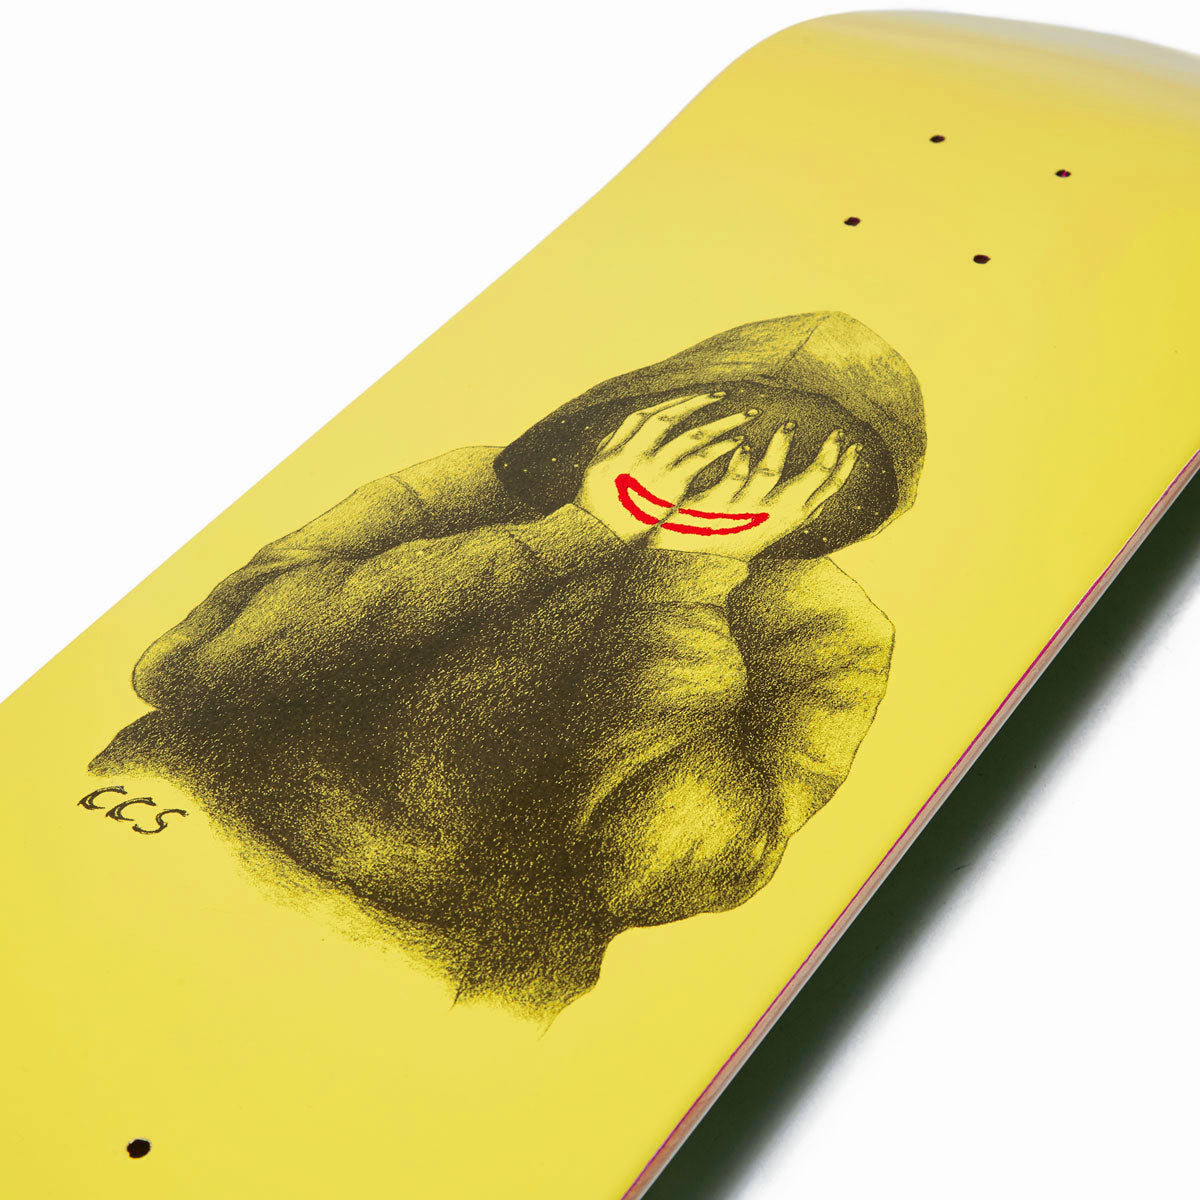 CCS Smile on The Surface Skateboard Deck - Yellow image 3